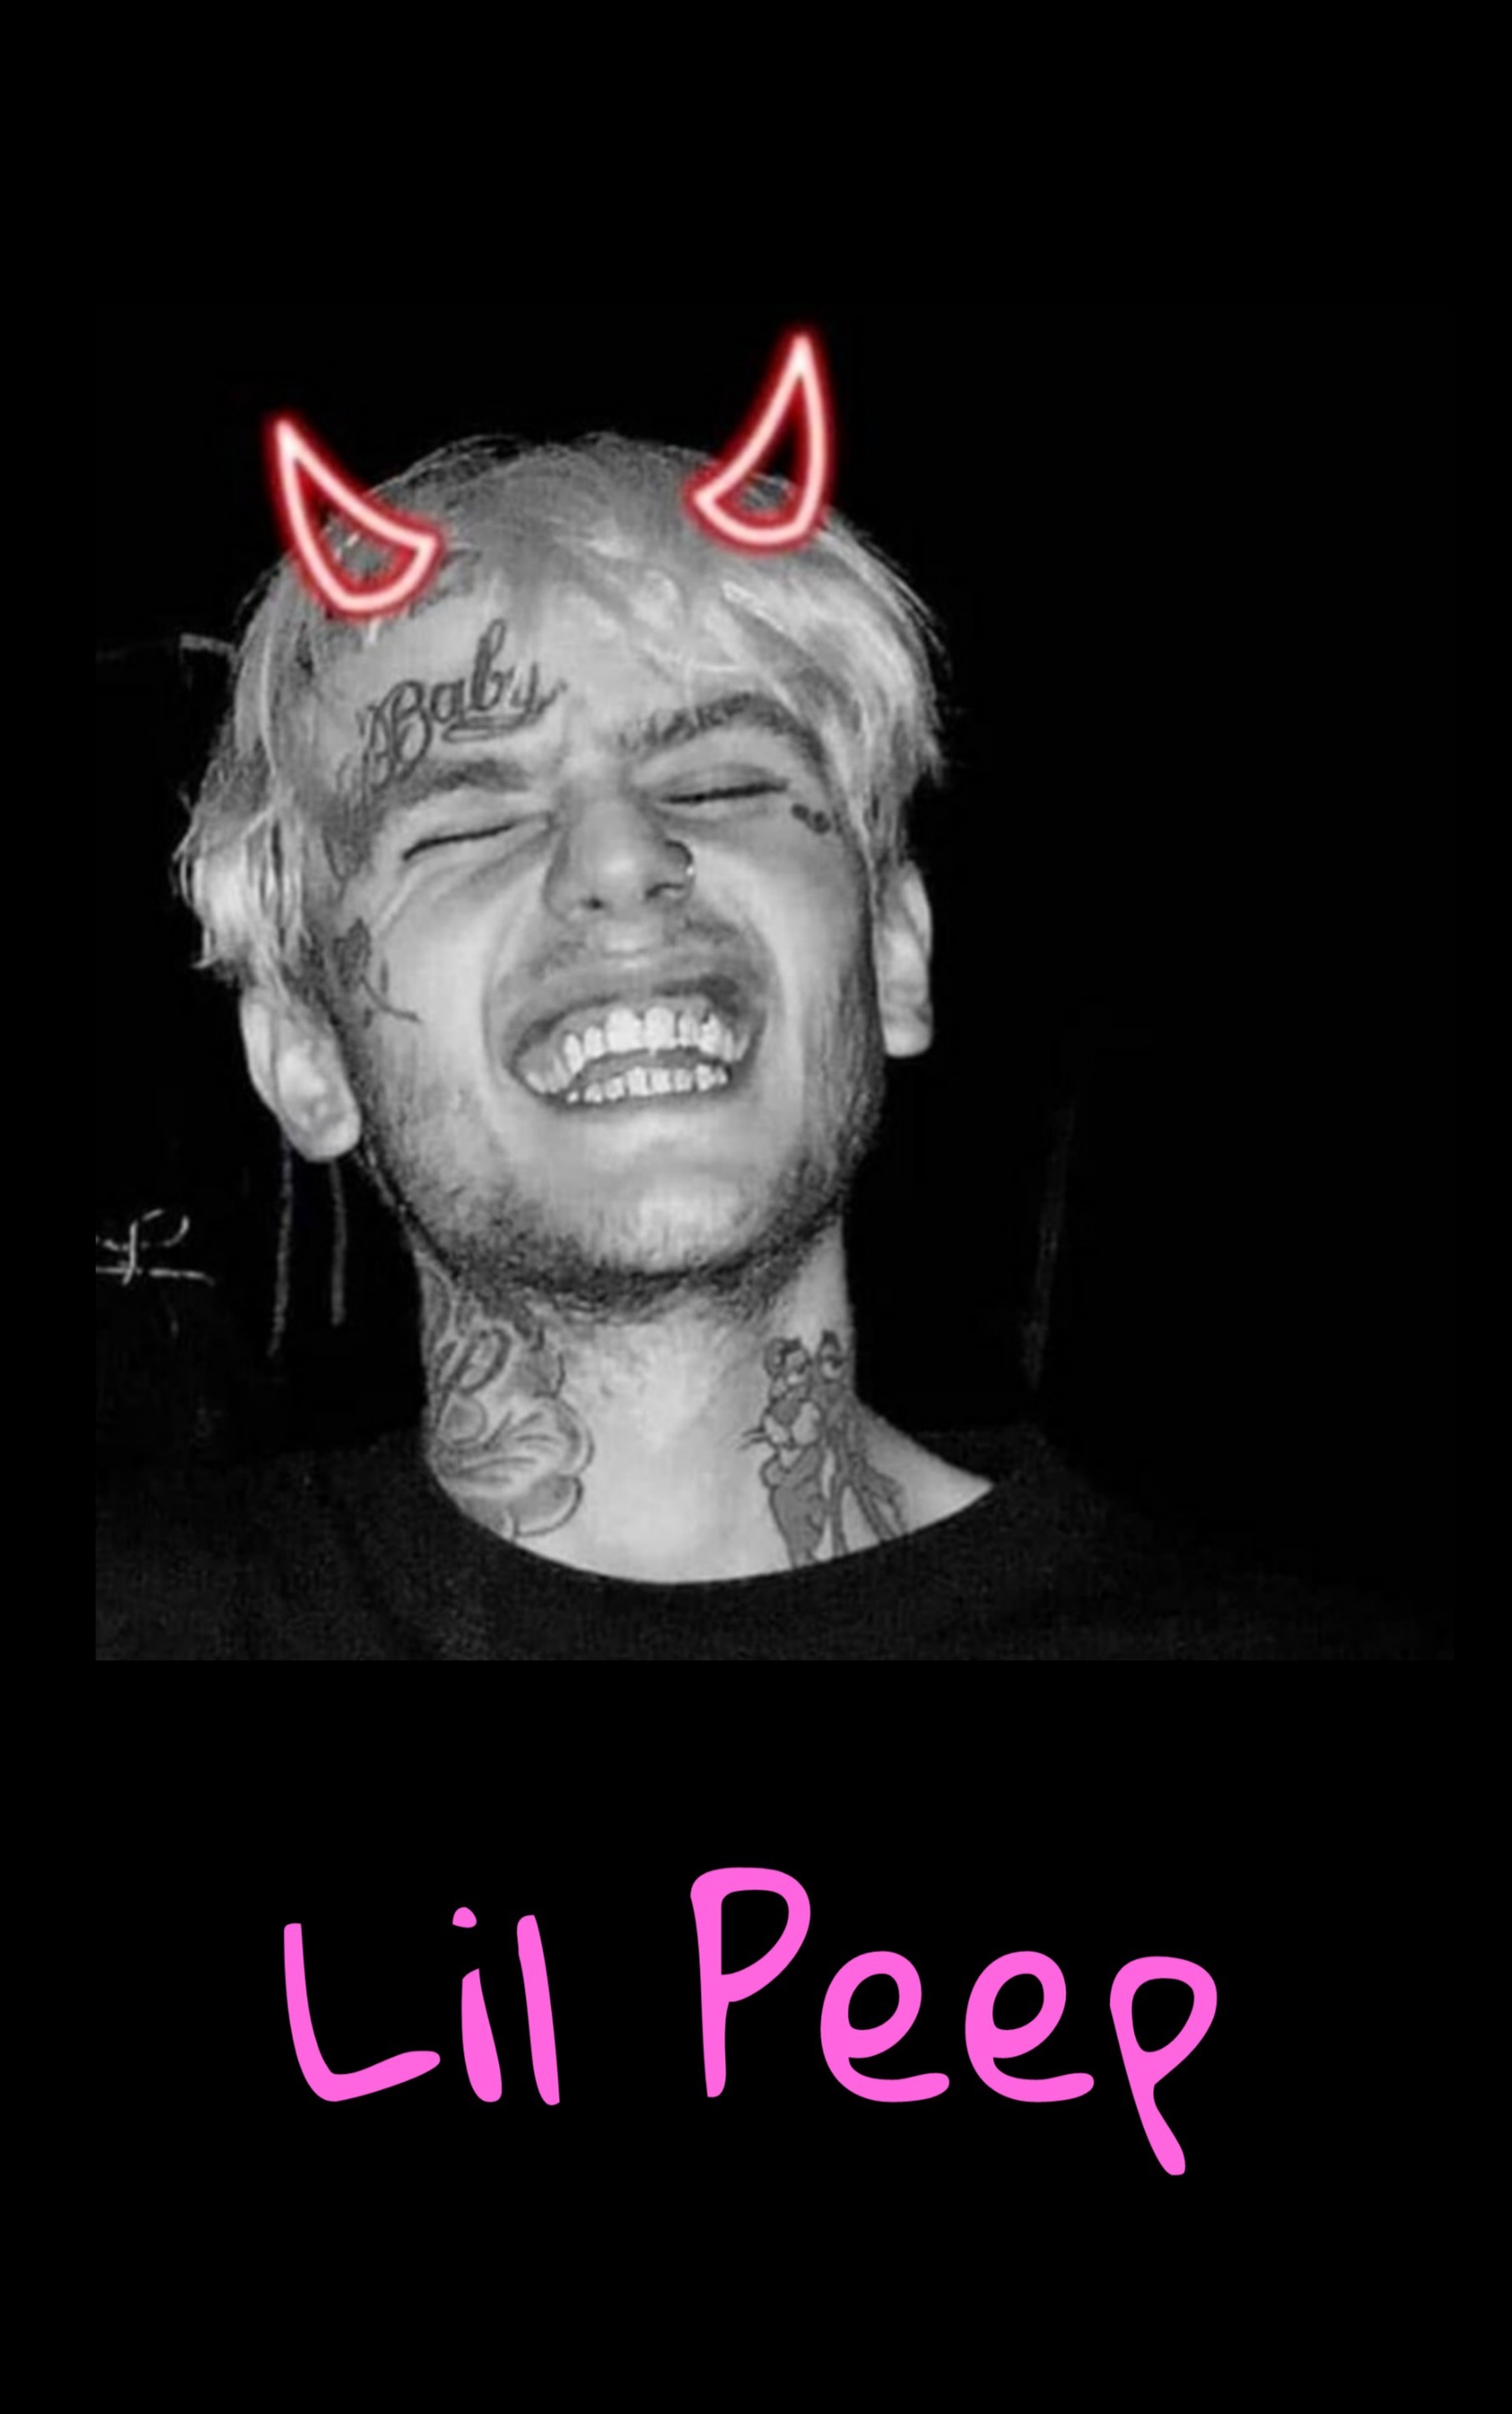 Lil Peep Wallpaper Hd Phone Lil Peep Wallpapers 82 Pictures Lil